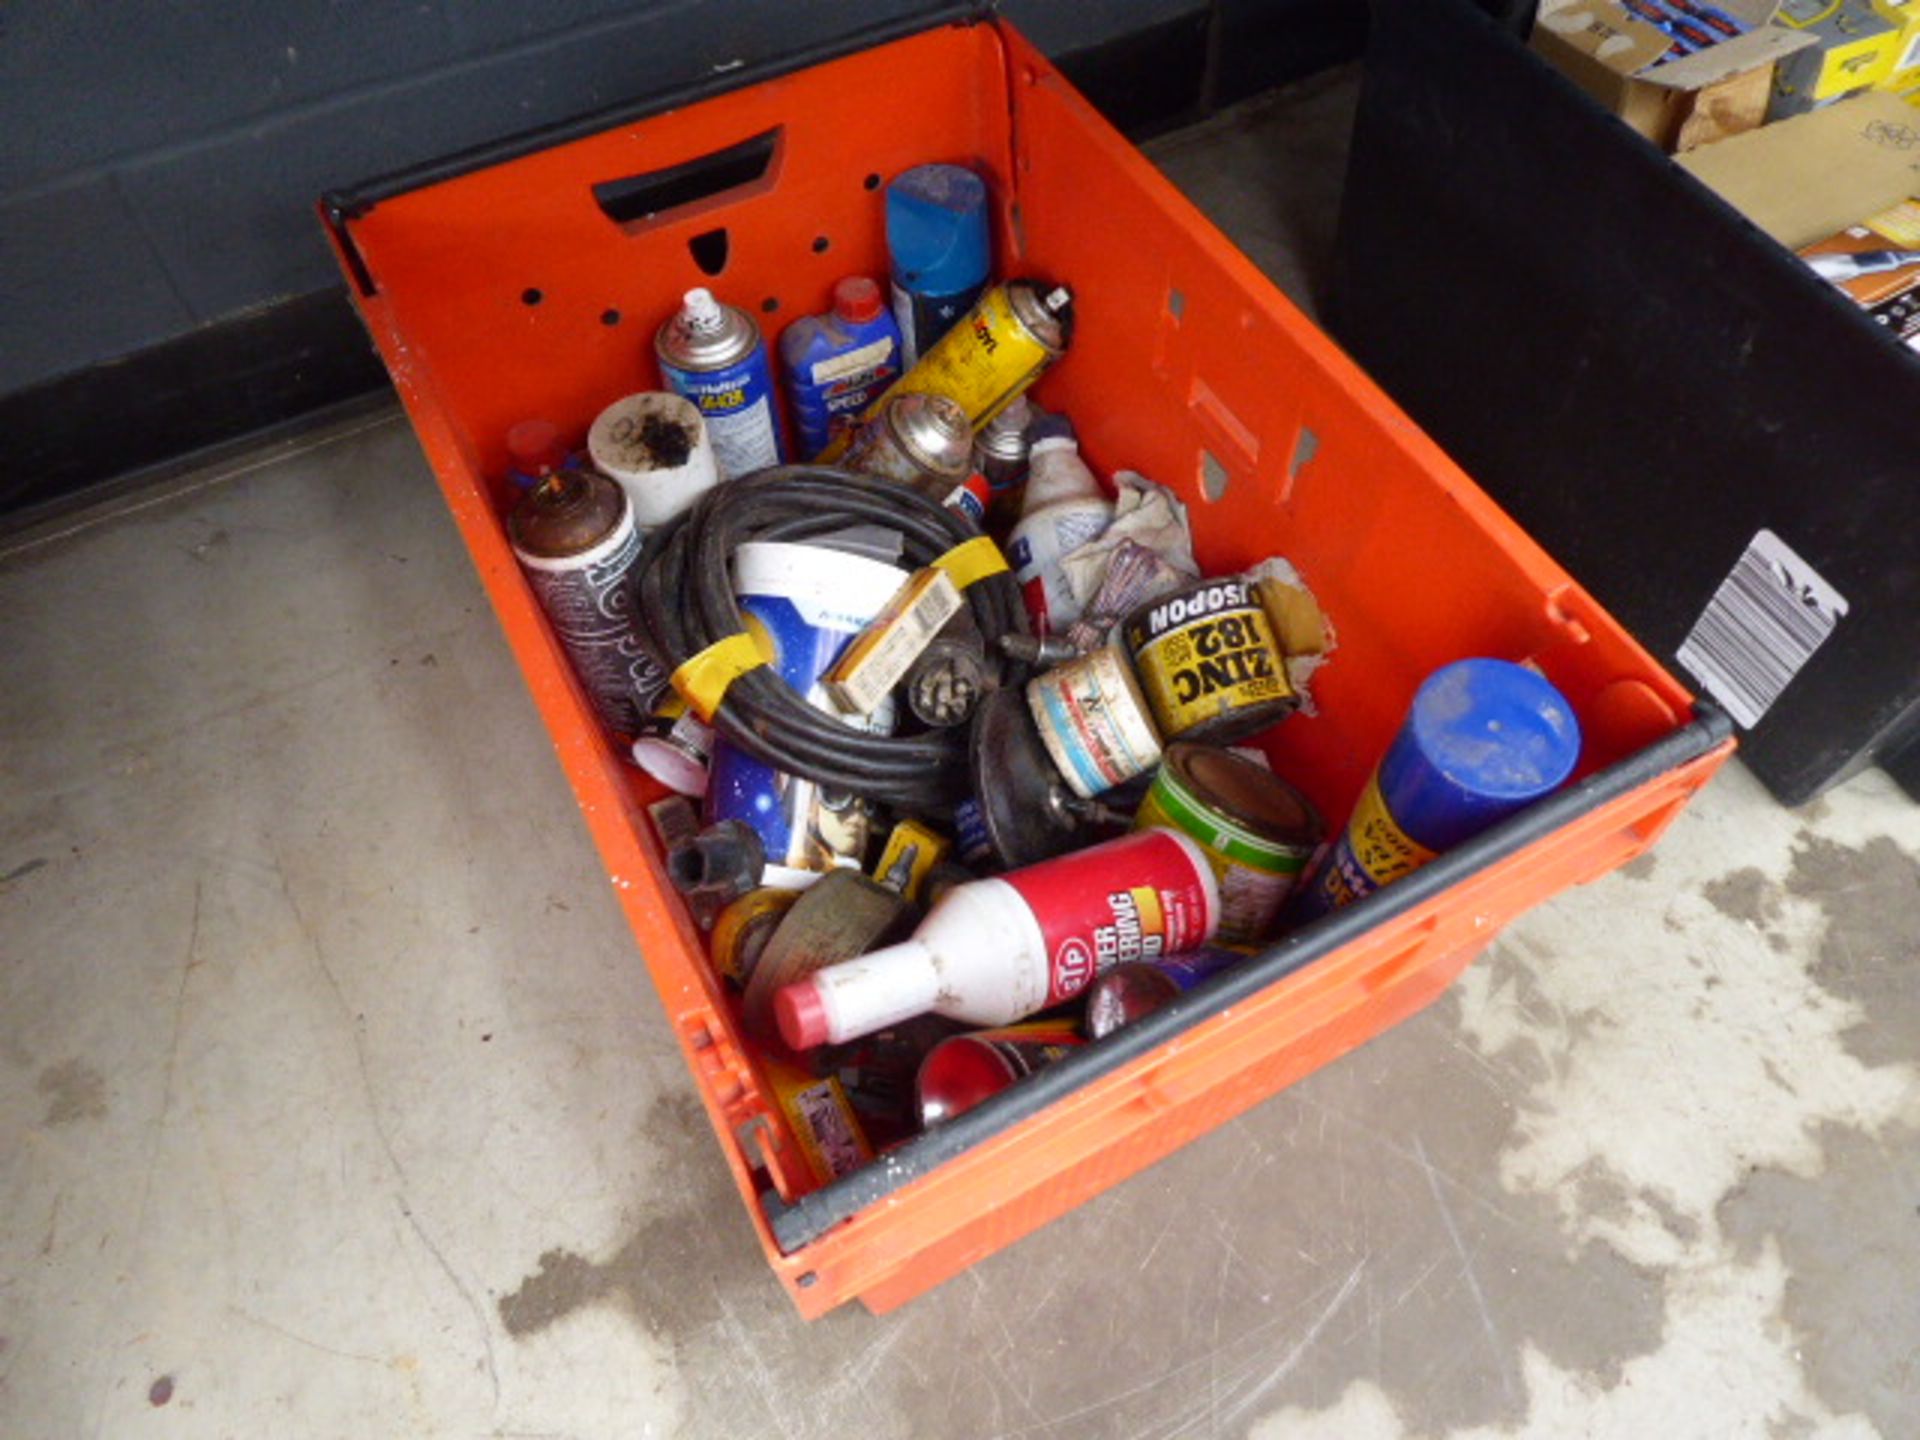 Box containing quantity of de-icer and car chemicals